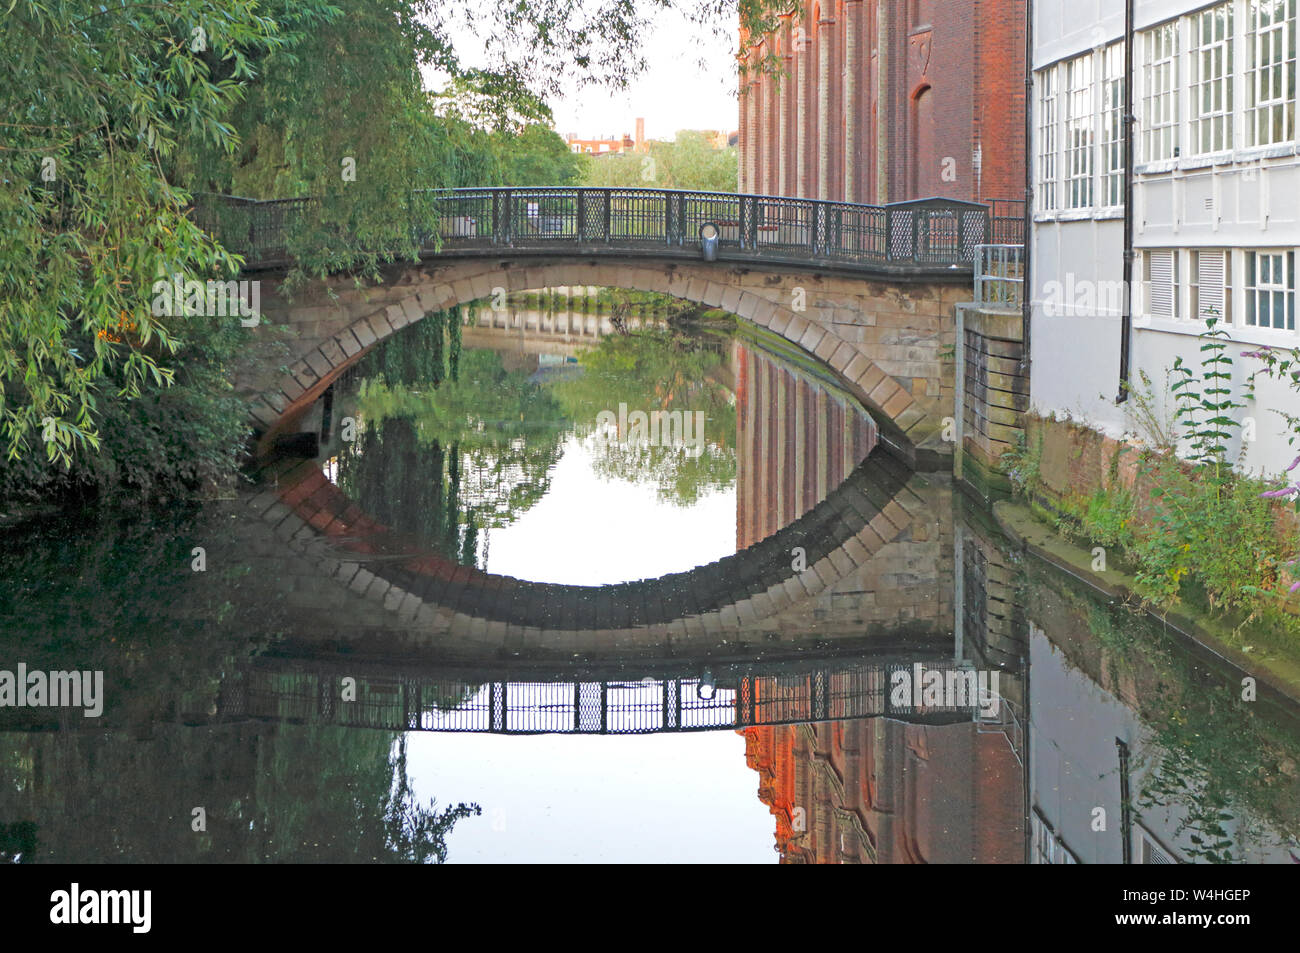 A view of Blackfriars Bridge over the River Wensum in the City centre of Norwich, Norfolk, England, United Kingdom, Europe. Stock Photo